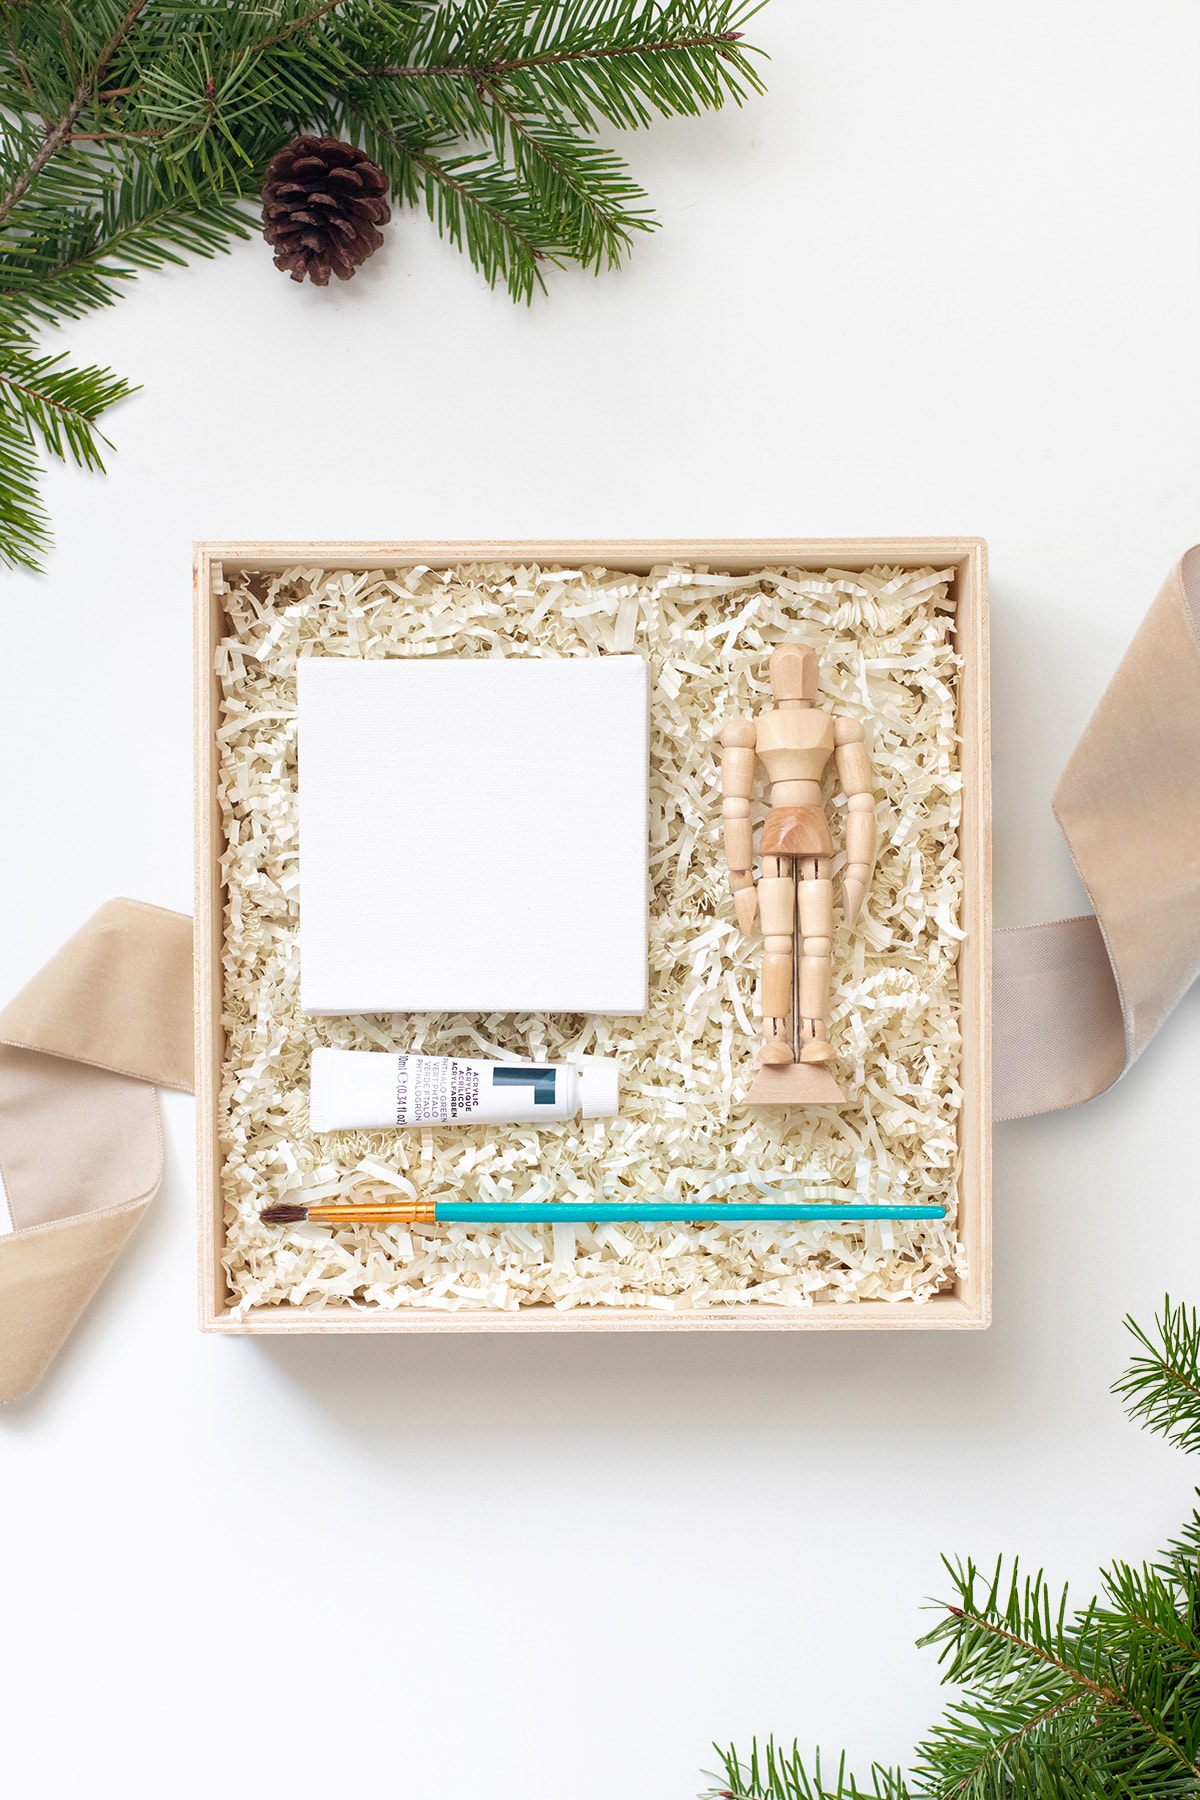 https://ctrlcurate.com/wp-content/uploads/2019/12/Relaxing-Personalized-20-Gift-Box-Ideas_Craft-Box.jpg